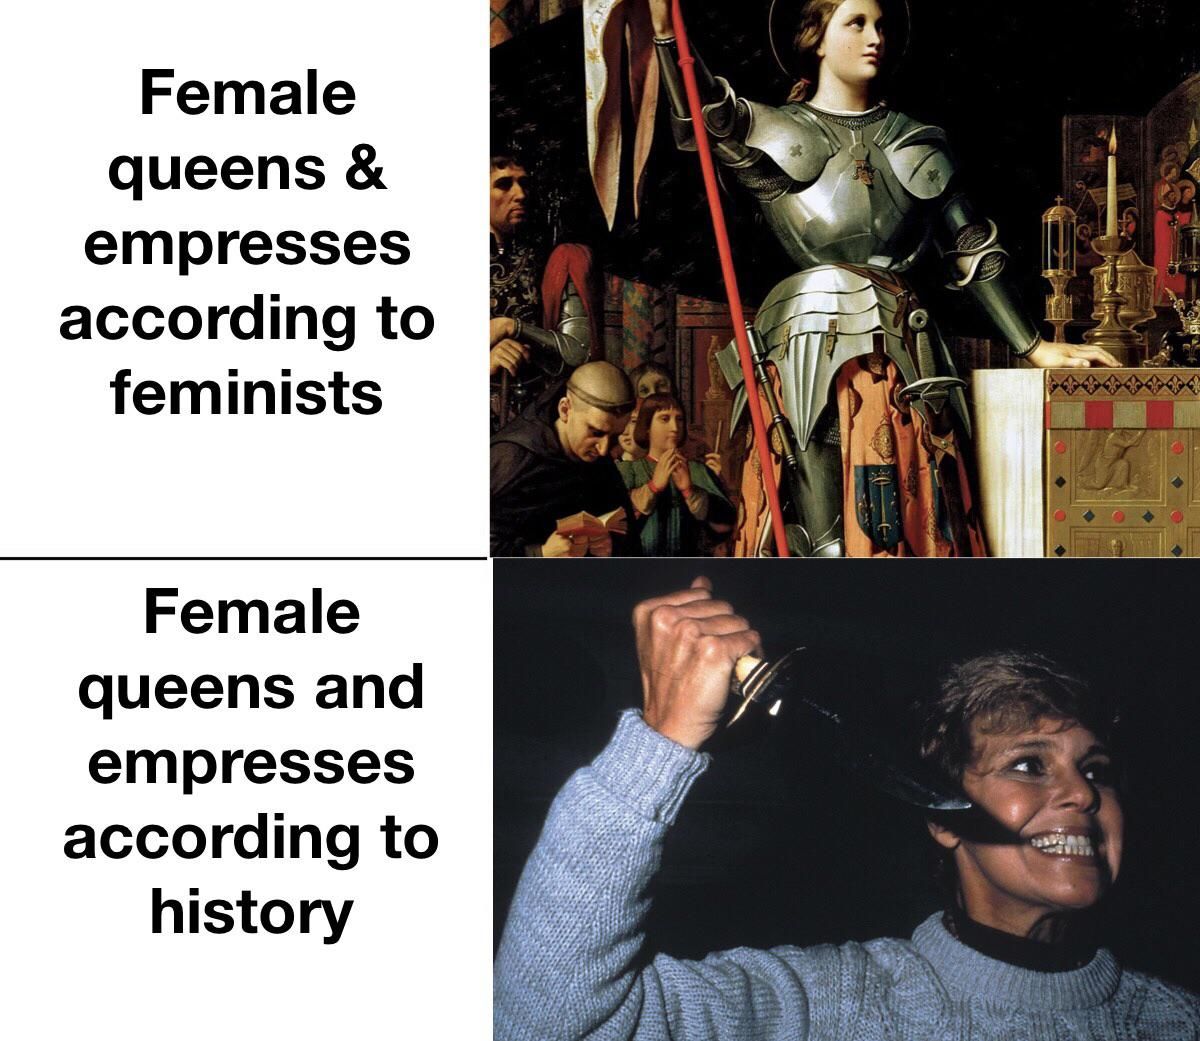 I’m not saying dudes were much better, just pointing out you don’t become a 3rd century empress being a sweetheart